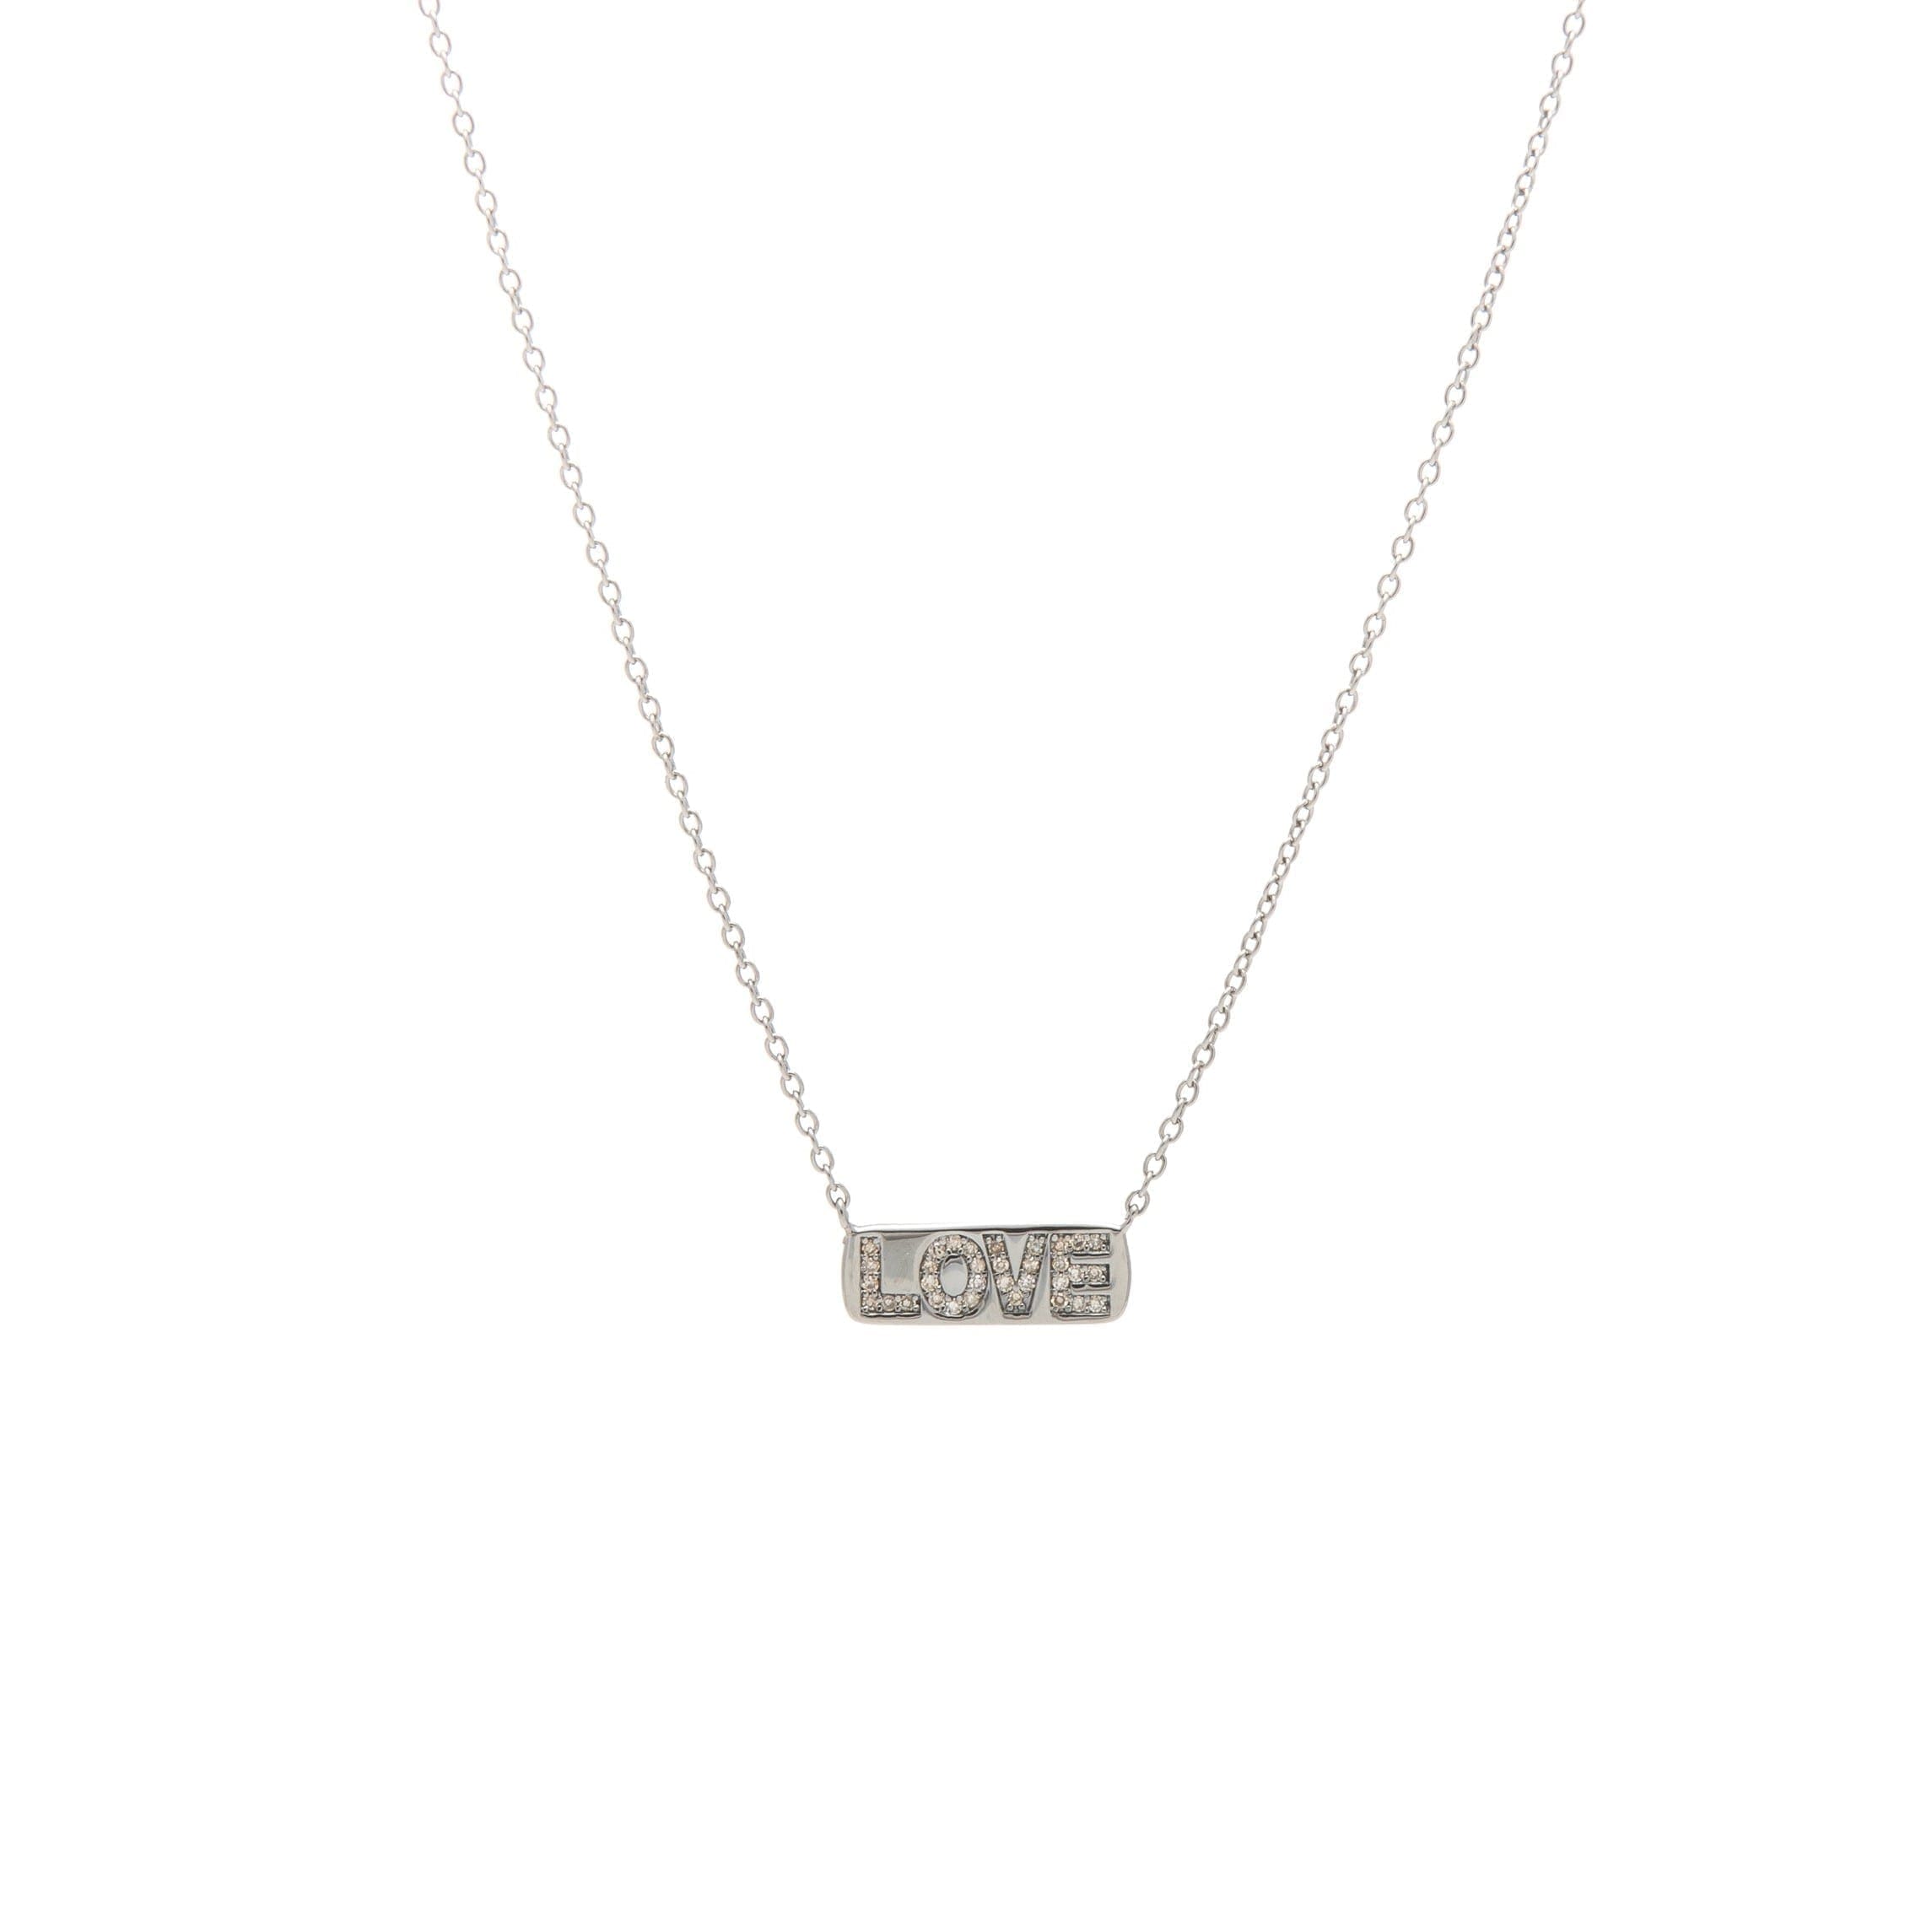 Mini LOVE Nameplate Necklace | BE LOVED Jewelry